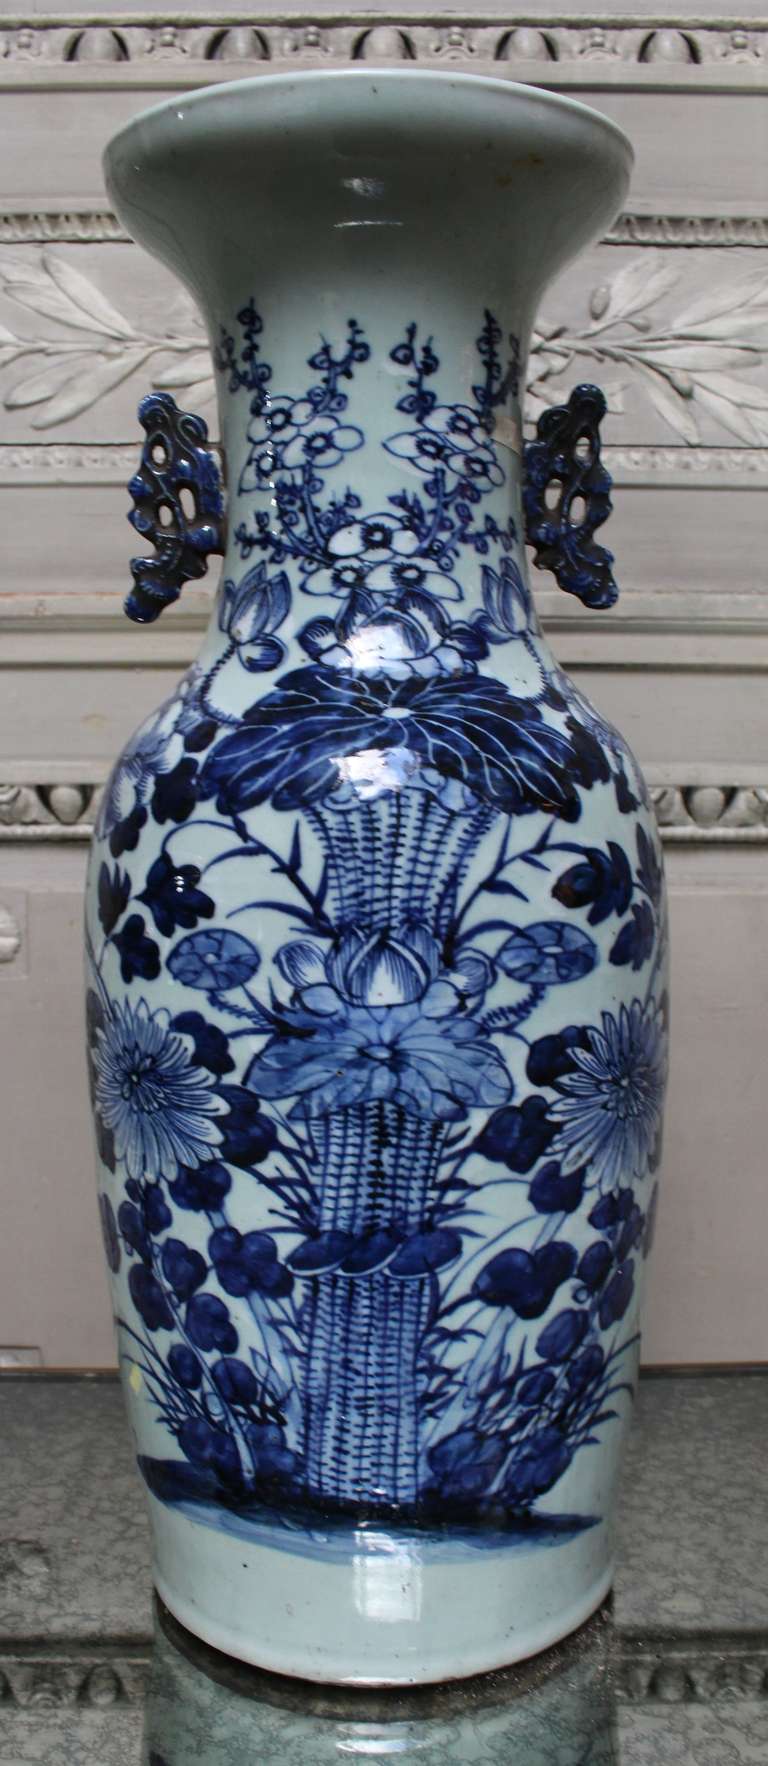 A Blue and White Chinese Porcelain Vase with Floral Design